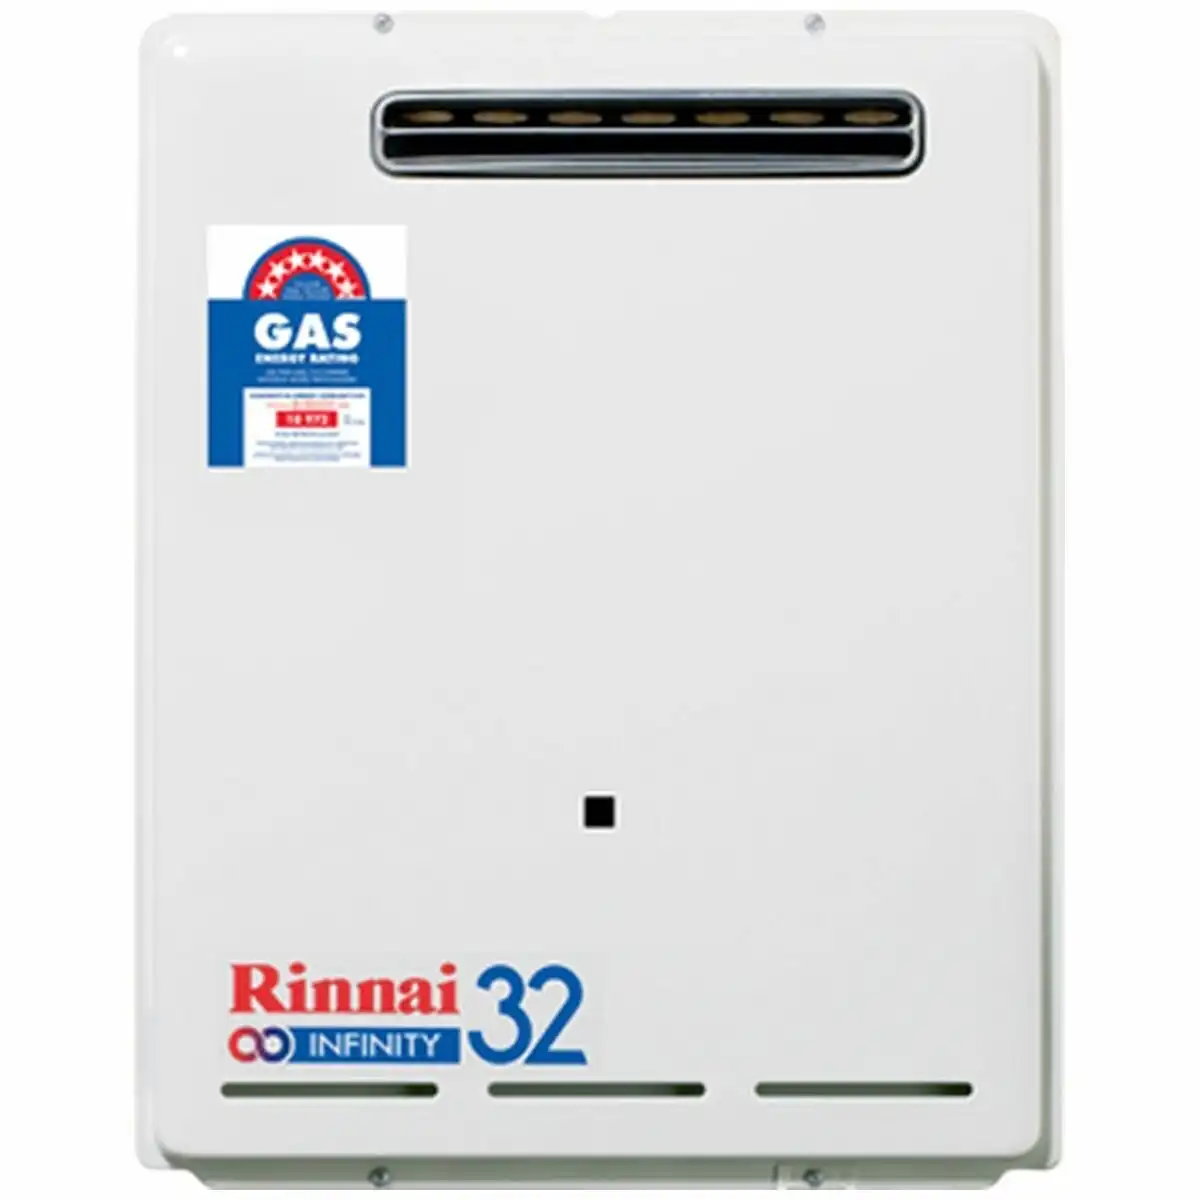 Rinnai 32L Continuous Flow 60-degree Hot Water System Natural Gas